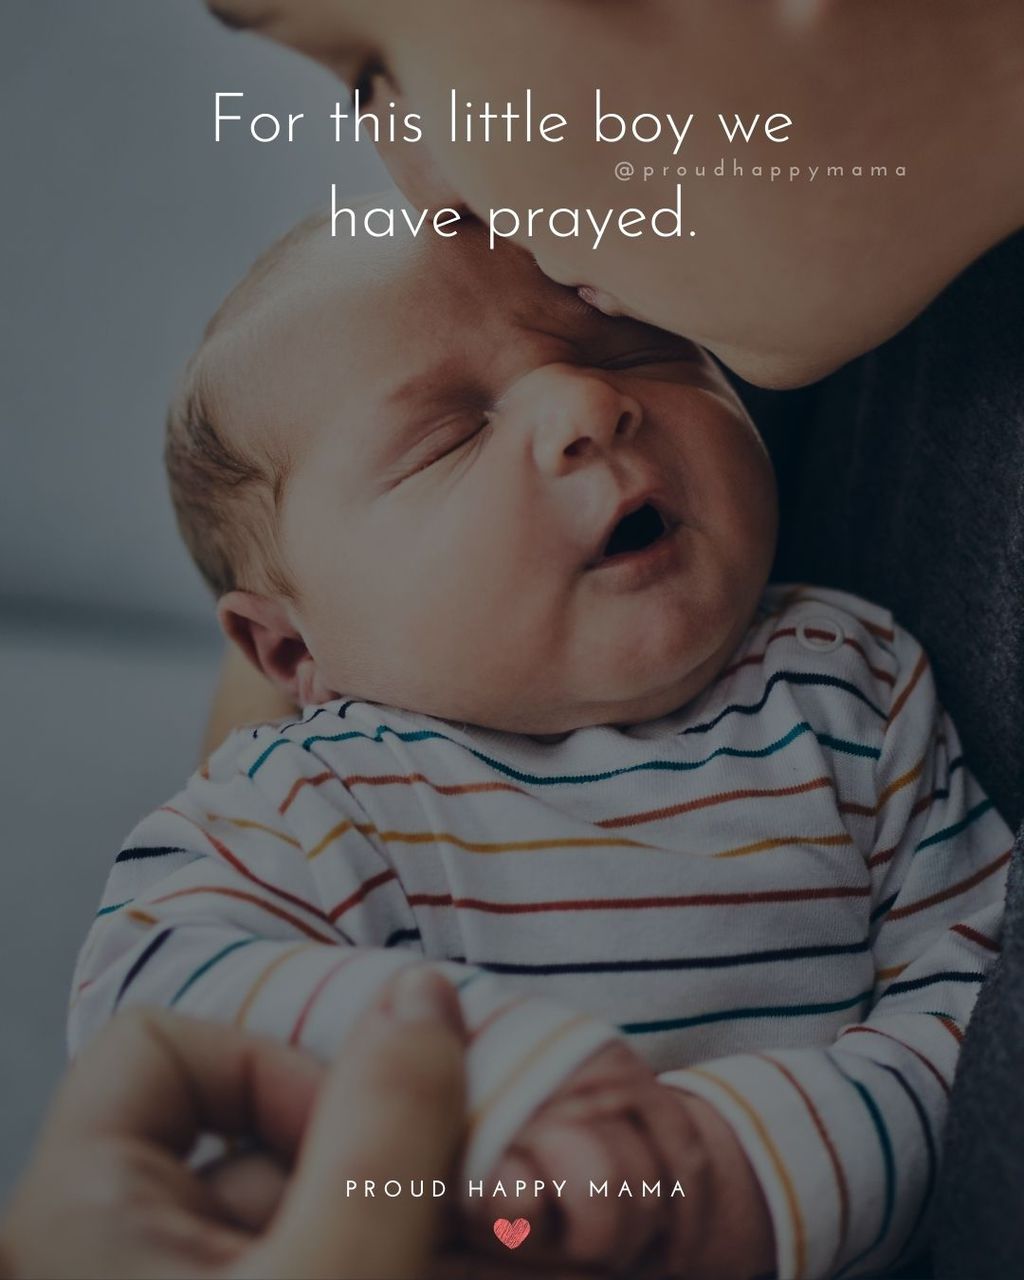 70+ Cute Baby Boy Quotes That Will Make Your Heart Smile